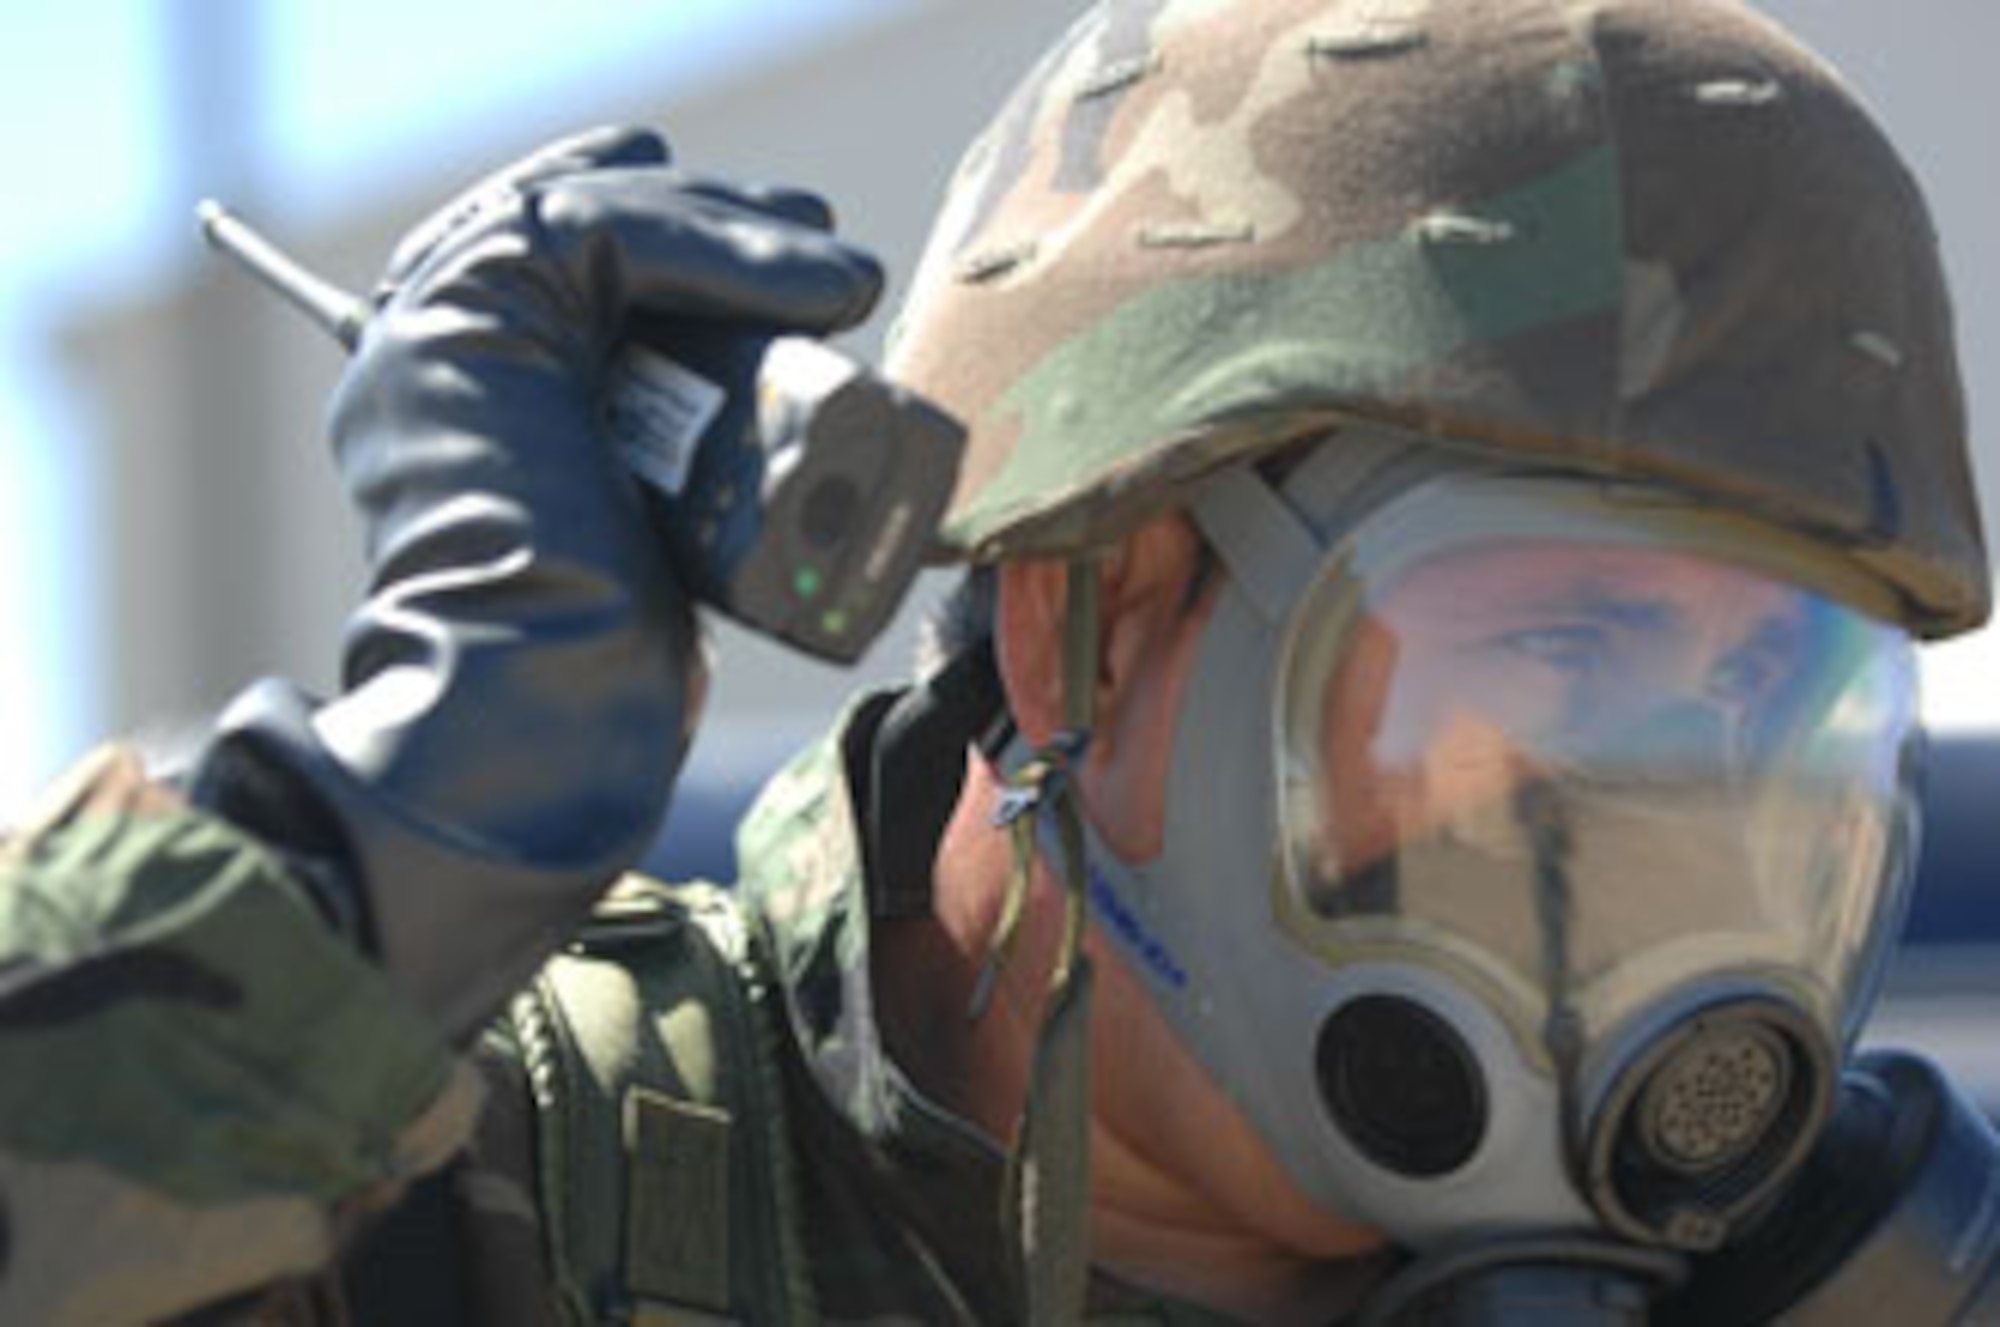 An Airman from March Air Reserve Base, Calif., calls in the location of an unexploded ordnance while at San Clemente Island, Calif., participating in exercise Patriot Hook 2007.
U.S. Air Force photo by Staff Sgt. Francisco V. Govea II